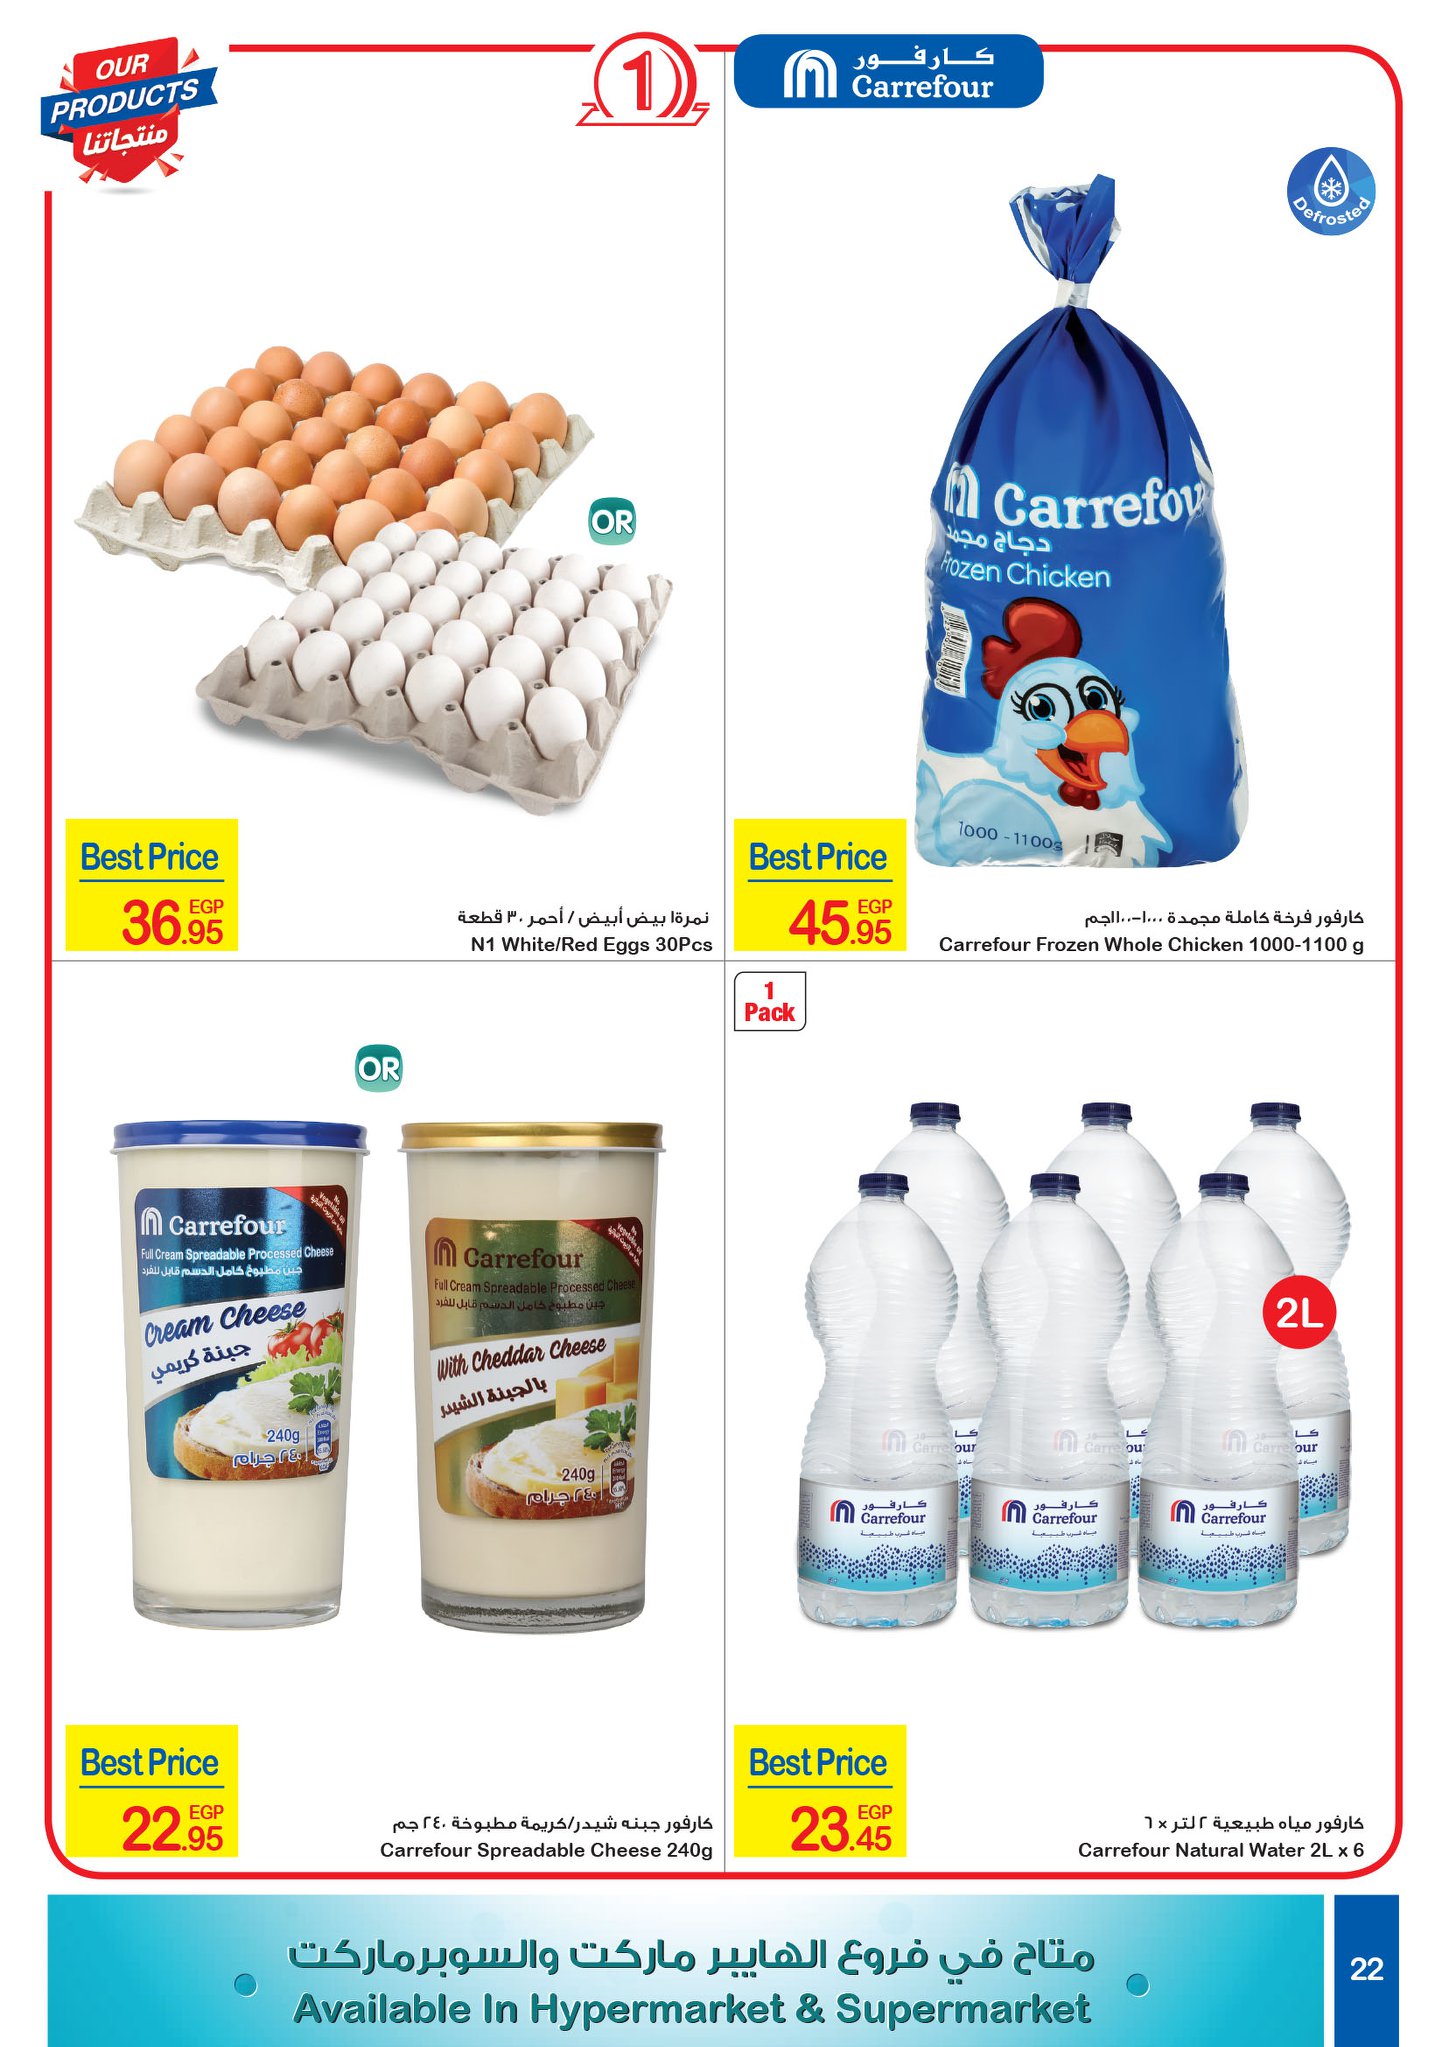 Carrefour Flyer from 16/7 till 27/7 | Carrefour Egypt 22